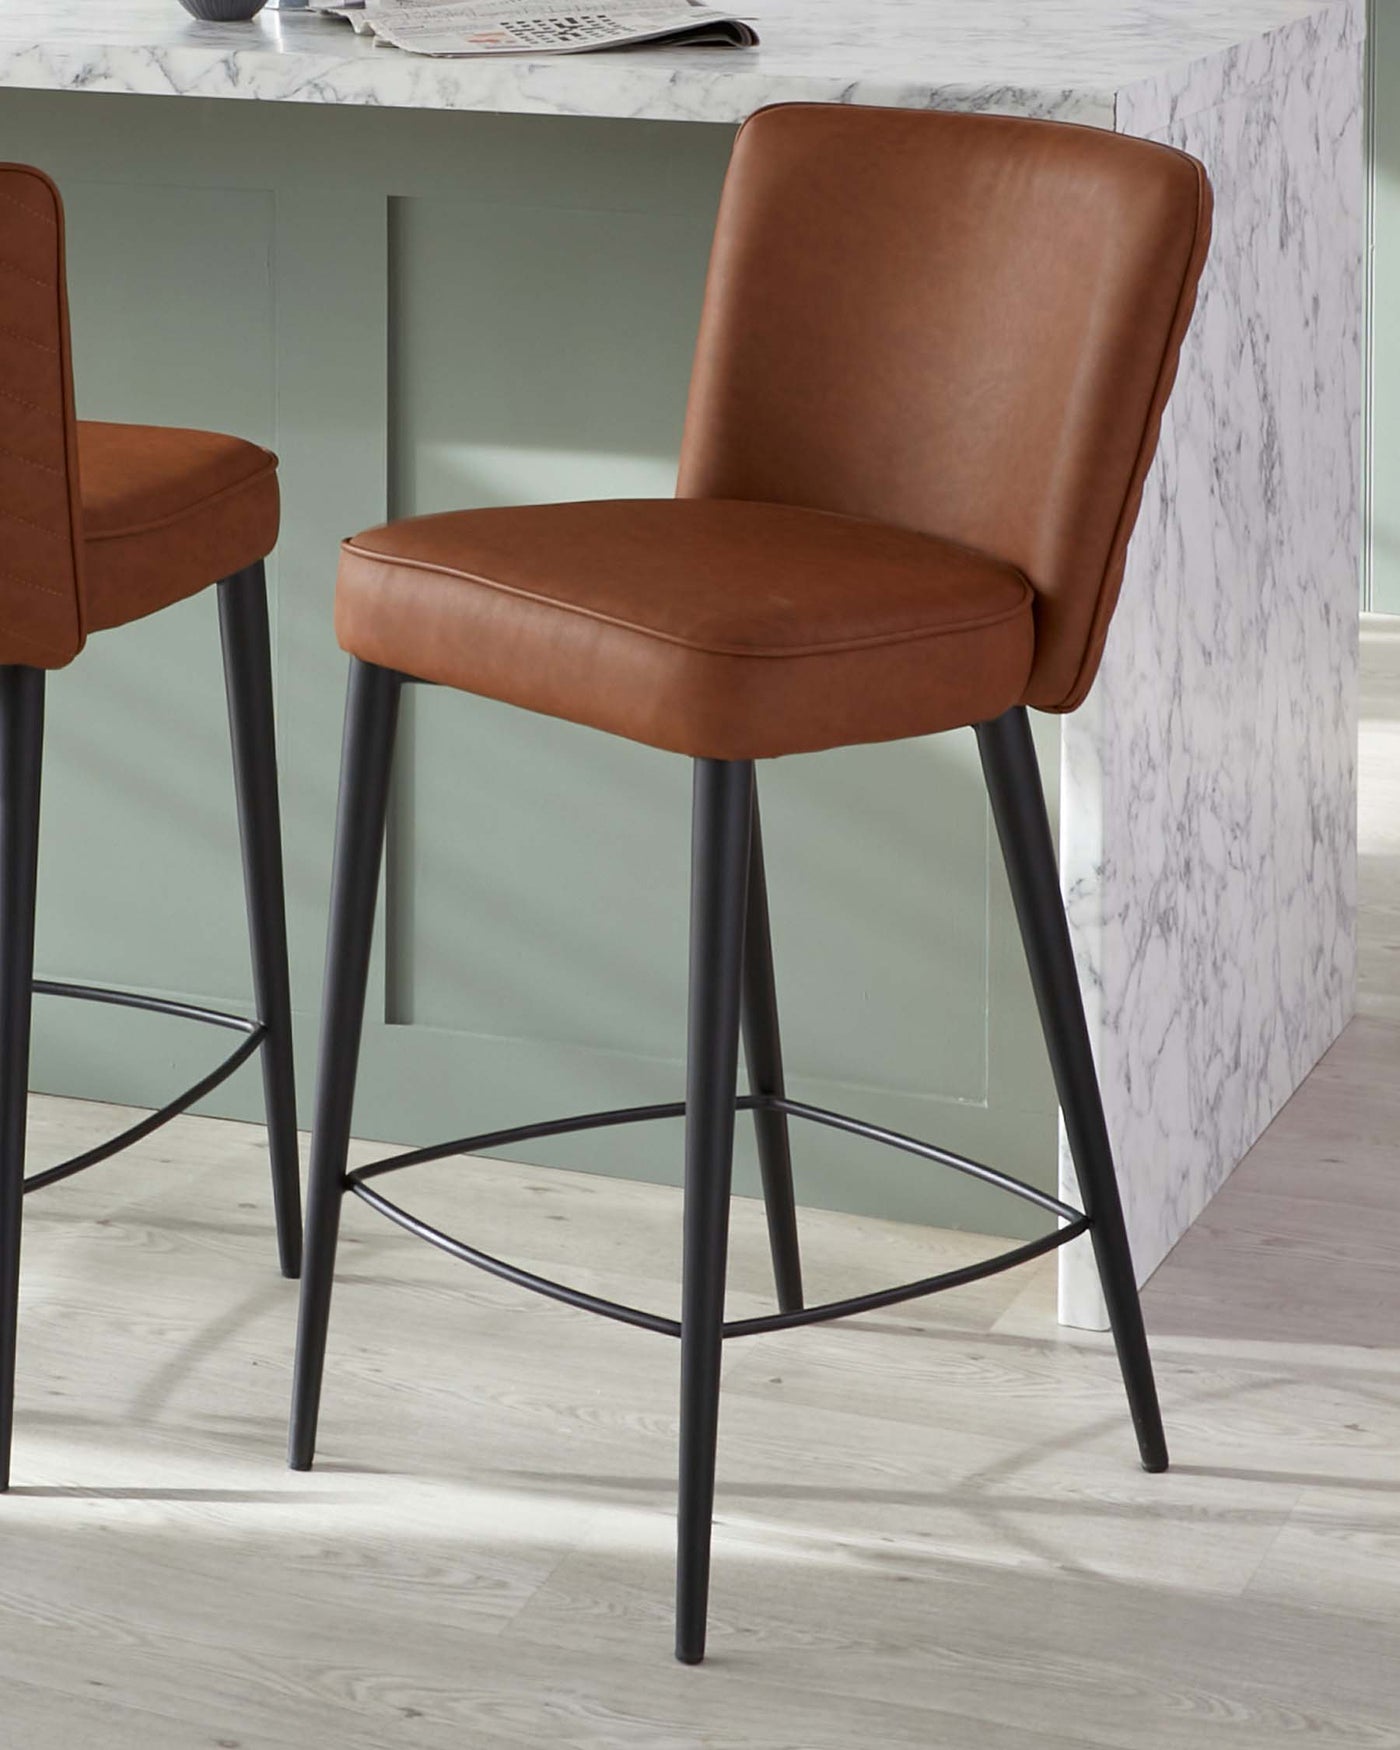 Modern brown faux leather bar stool with a padded back and seat with decorative stitching, anchored by a slender black metal frame with footrests. The stool complements a contemporary marble-patterned bar counter.